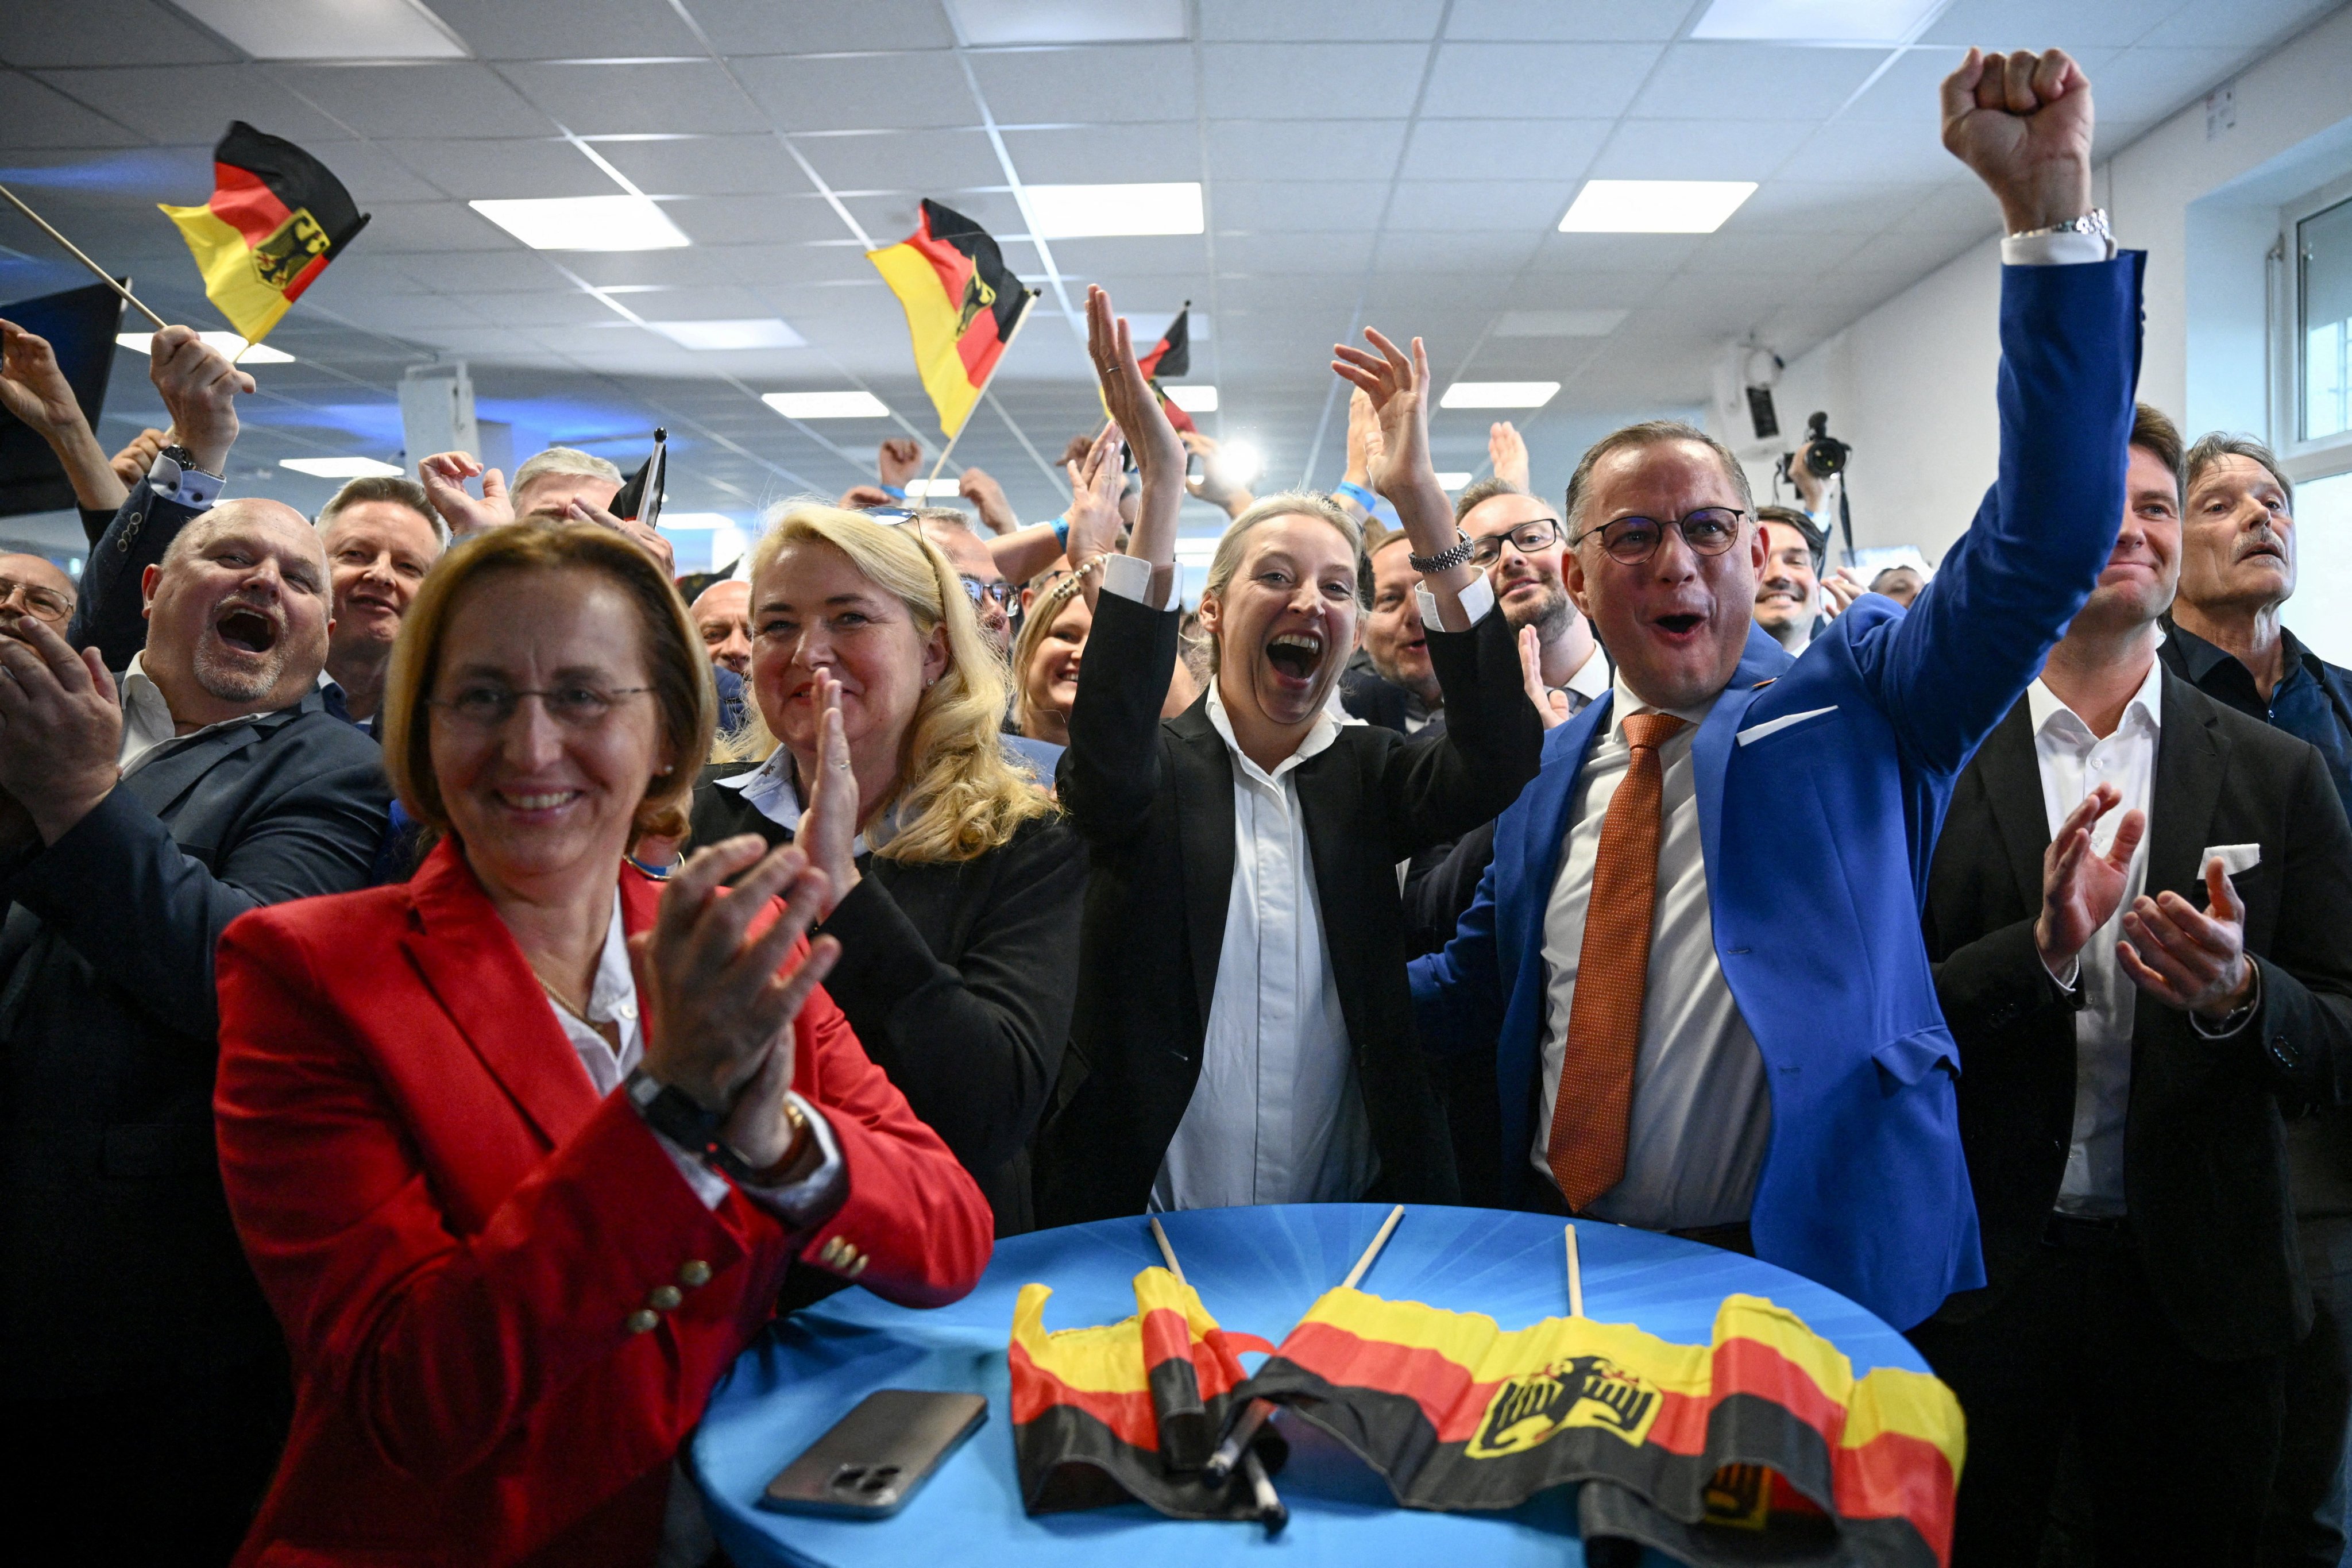 Alternative for Germany (AfD) party co-leaders Alice Weidel and Tino Chrupalla in Berlin, Germany. Photo: Reuters